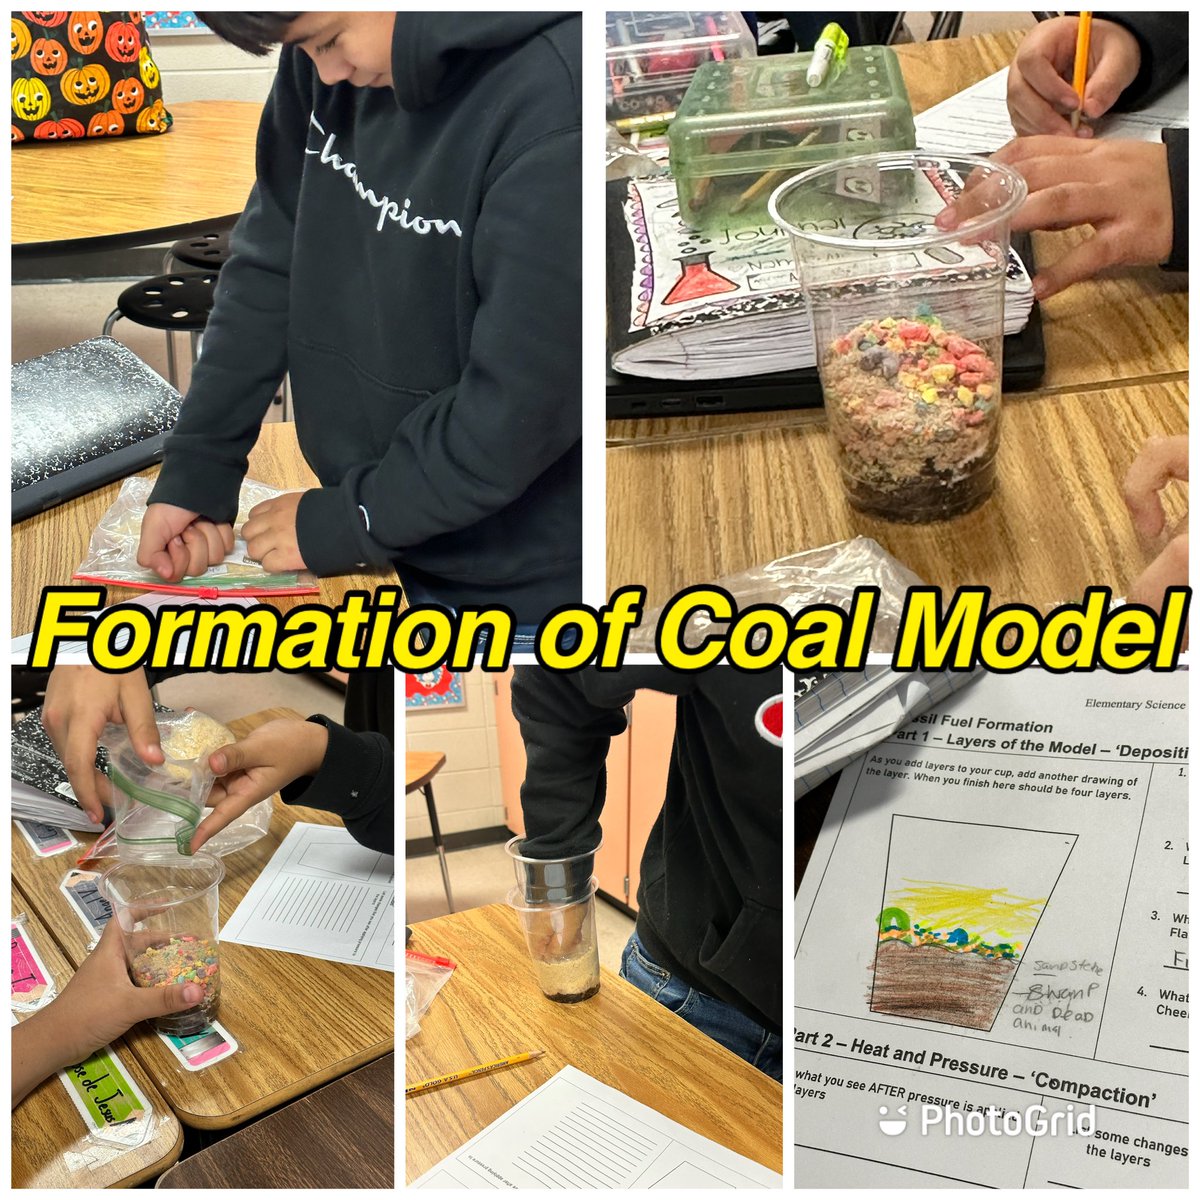 5th Grade Ss from @ReedAcad_AISD modeled the formation of the fossil fuel coal using cereal.   #ScienceEngagement 
#MyAldine 
#ScienceRising 
@AISDElemScience @STARS_902